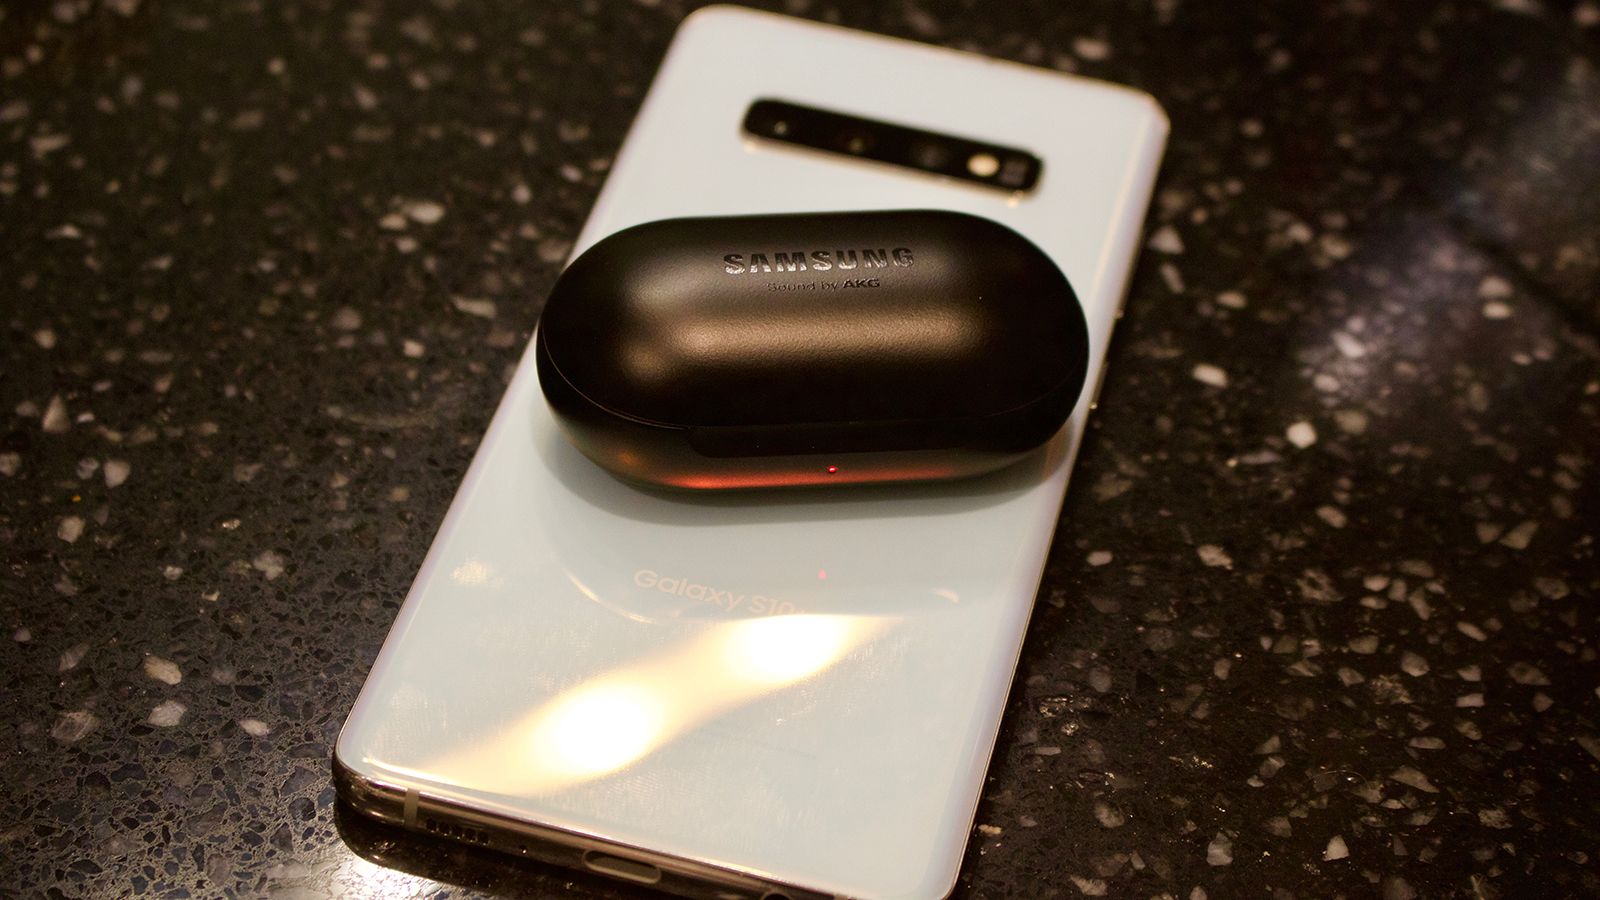 Samsung Galaxy Buds review: A waste of good design